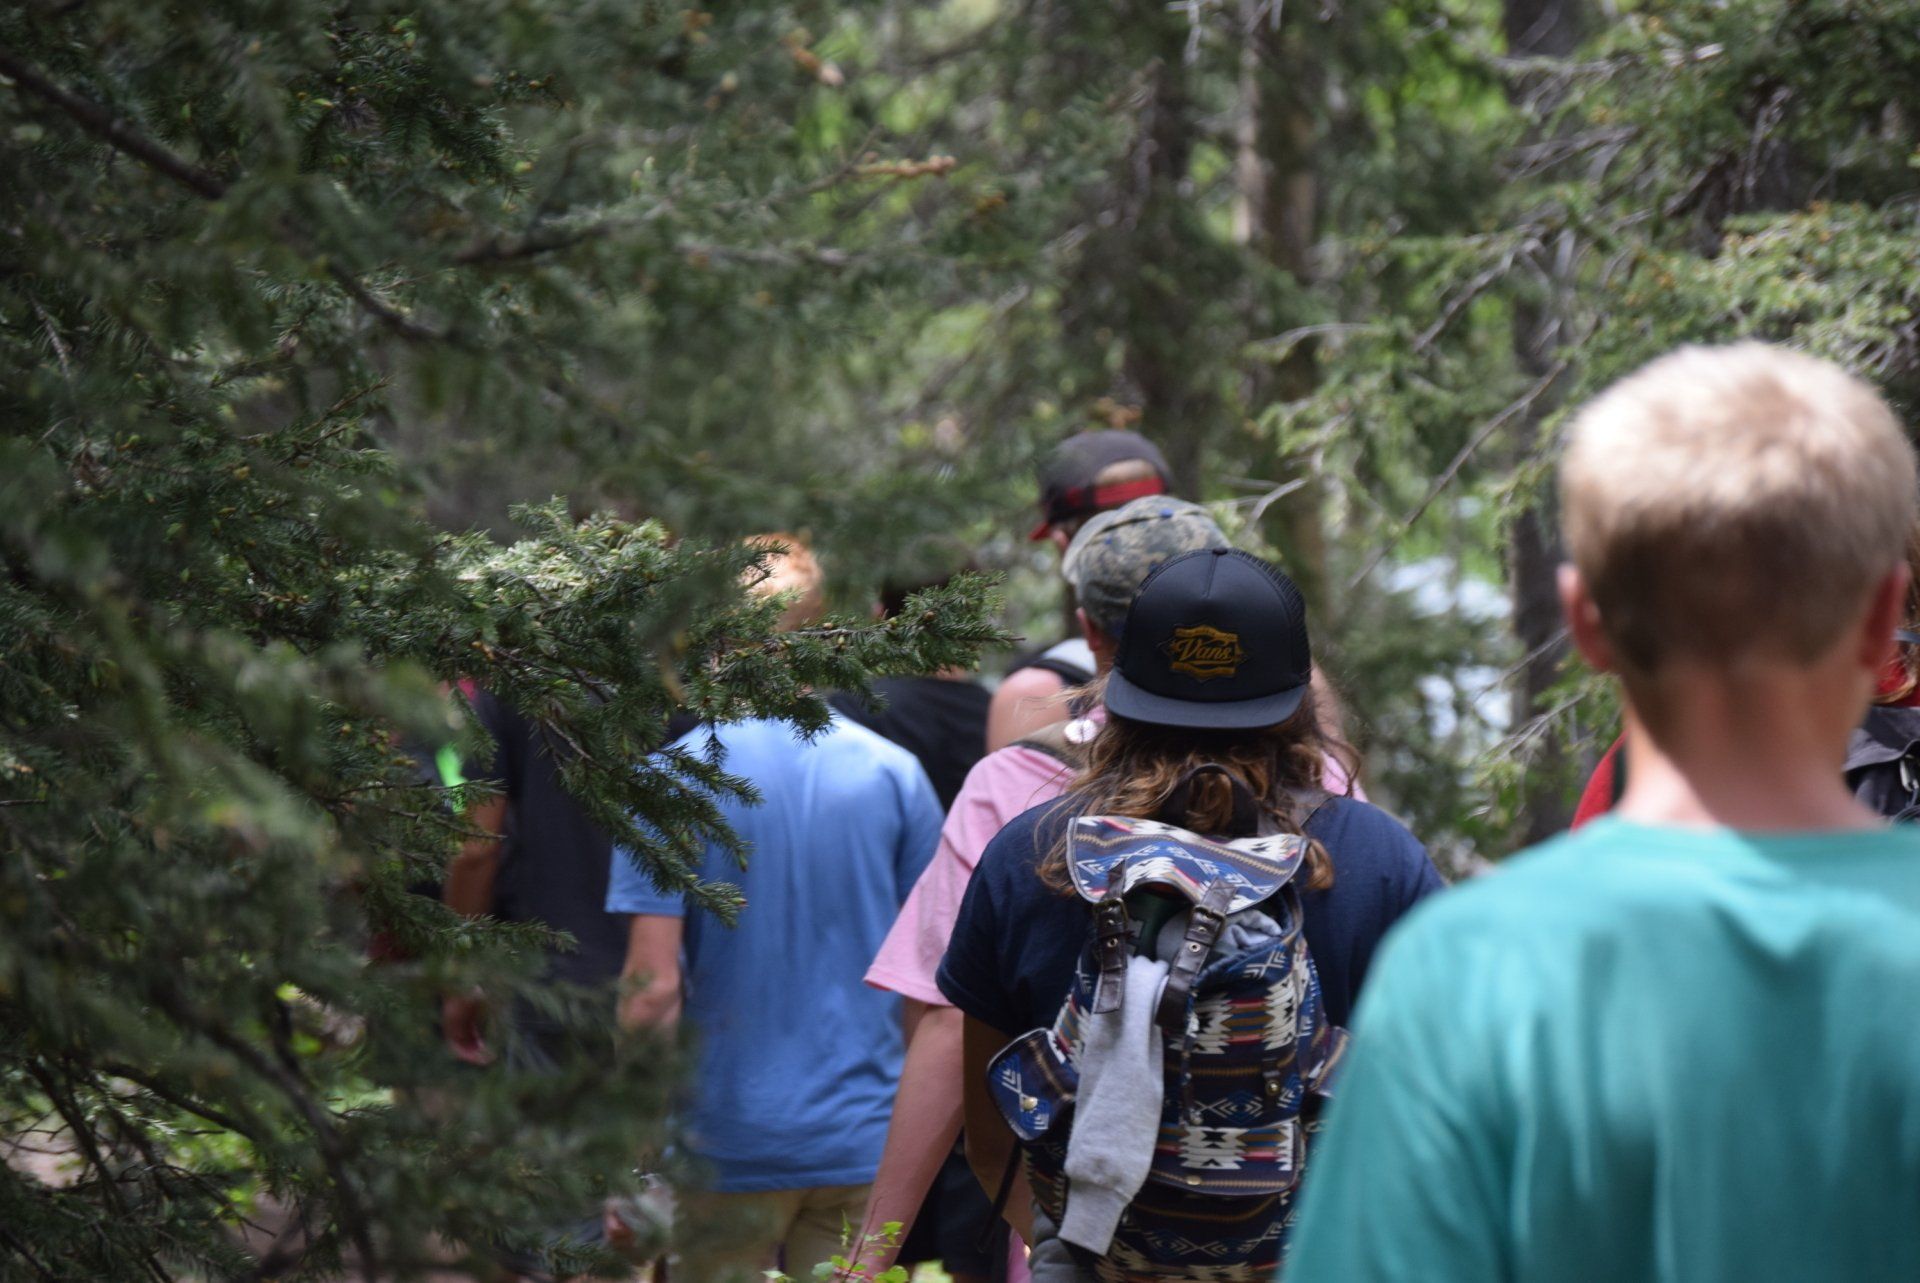 Hikers walking through a forest with backpacks and hats, on a trail path.